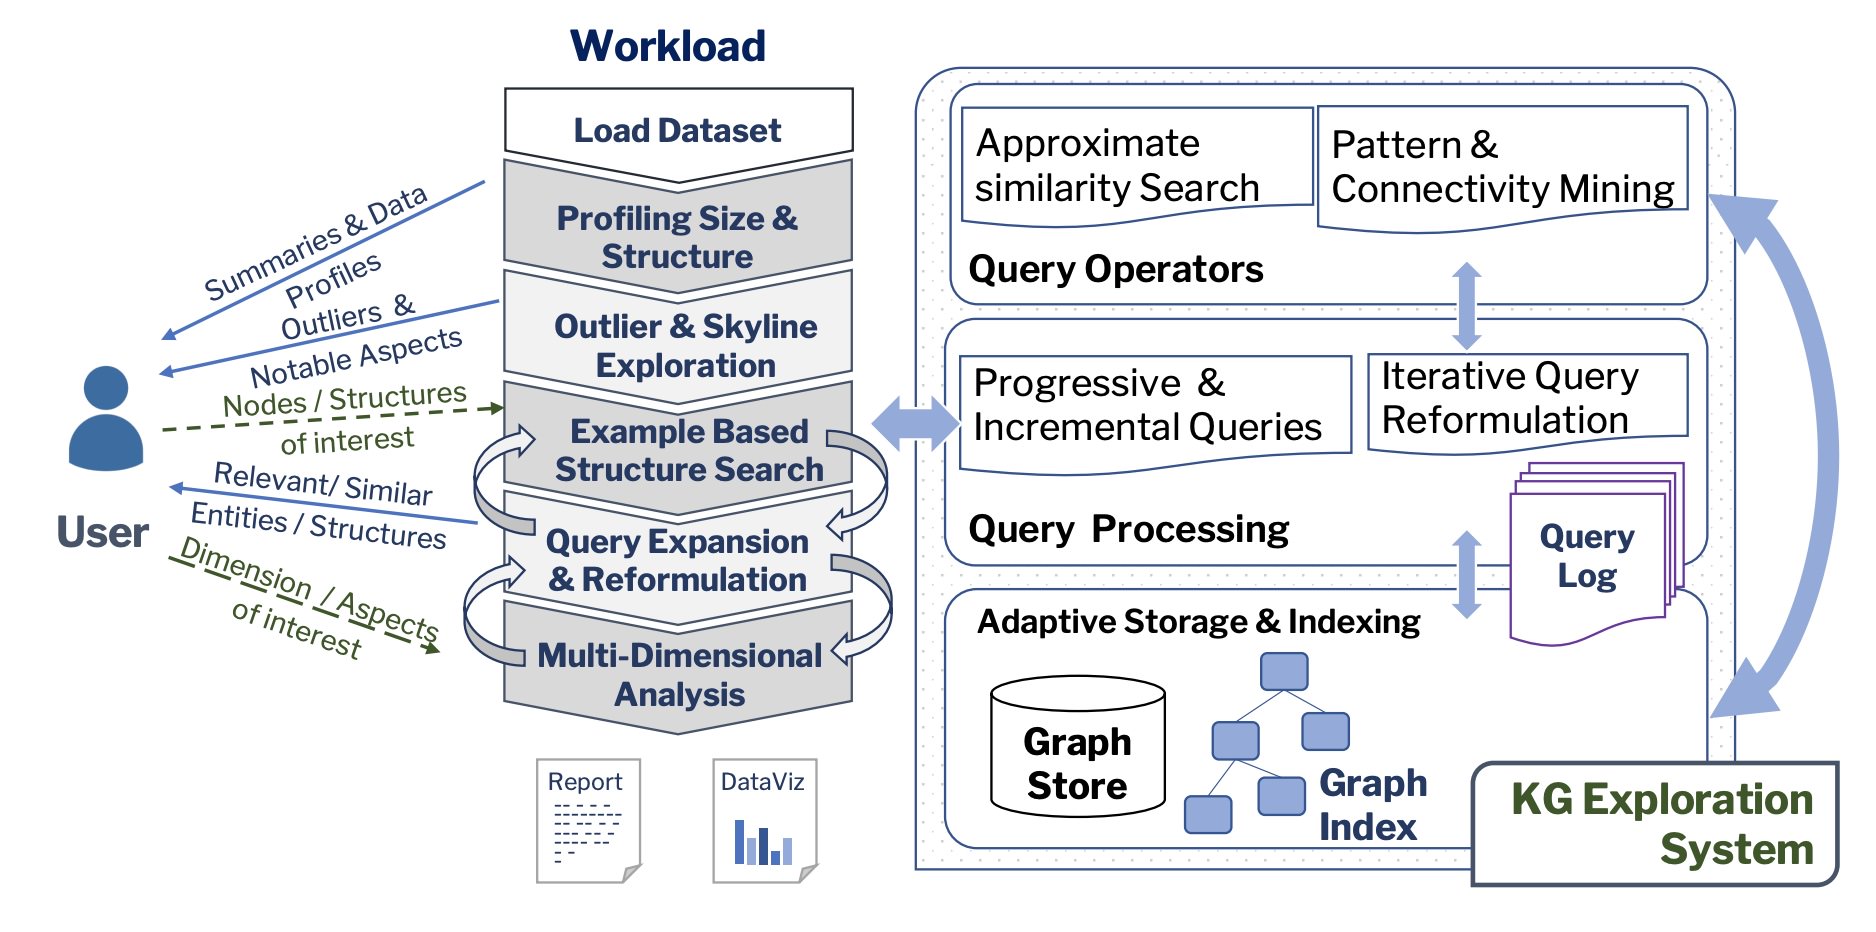 A KG Exploration system diagram, describing user interactions, the exploration worklof, and the components divided in query processing, query optimization, and optimized data storage.